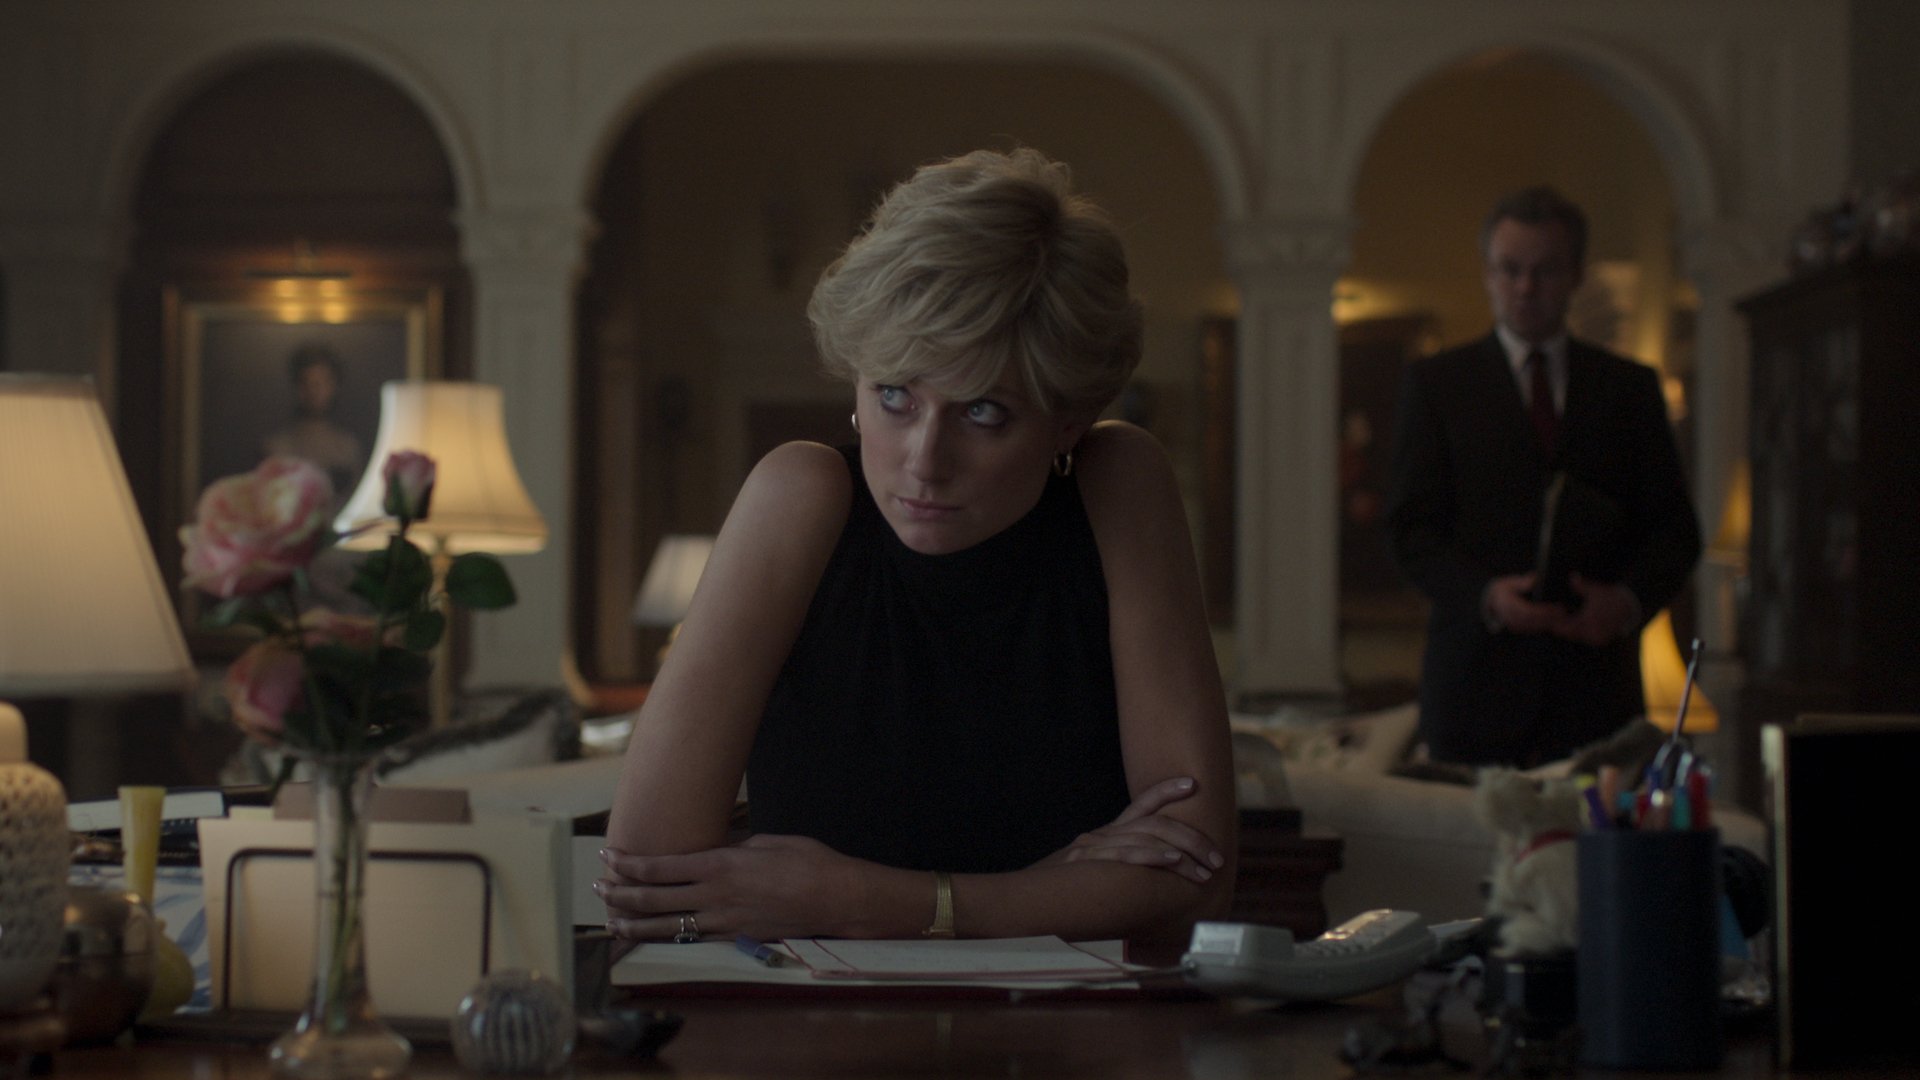 A woman in a black sleeveless top in an aristocratic lounge room sits at a desk looking stressed.